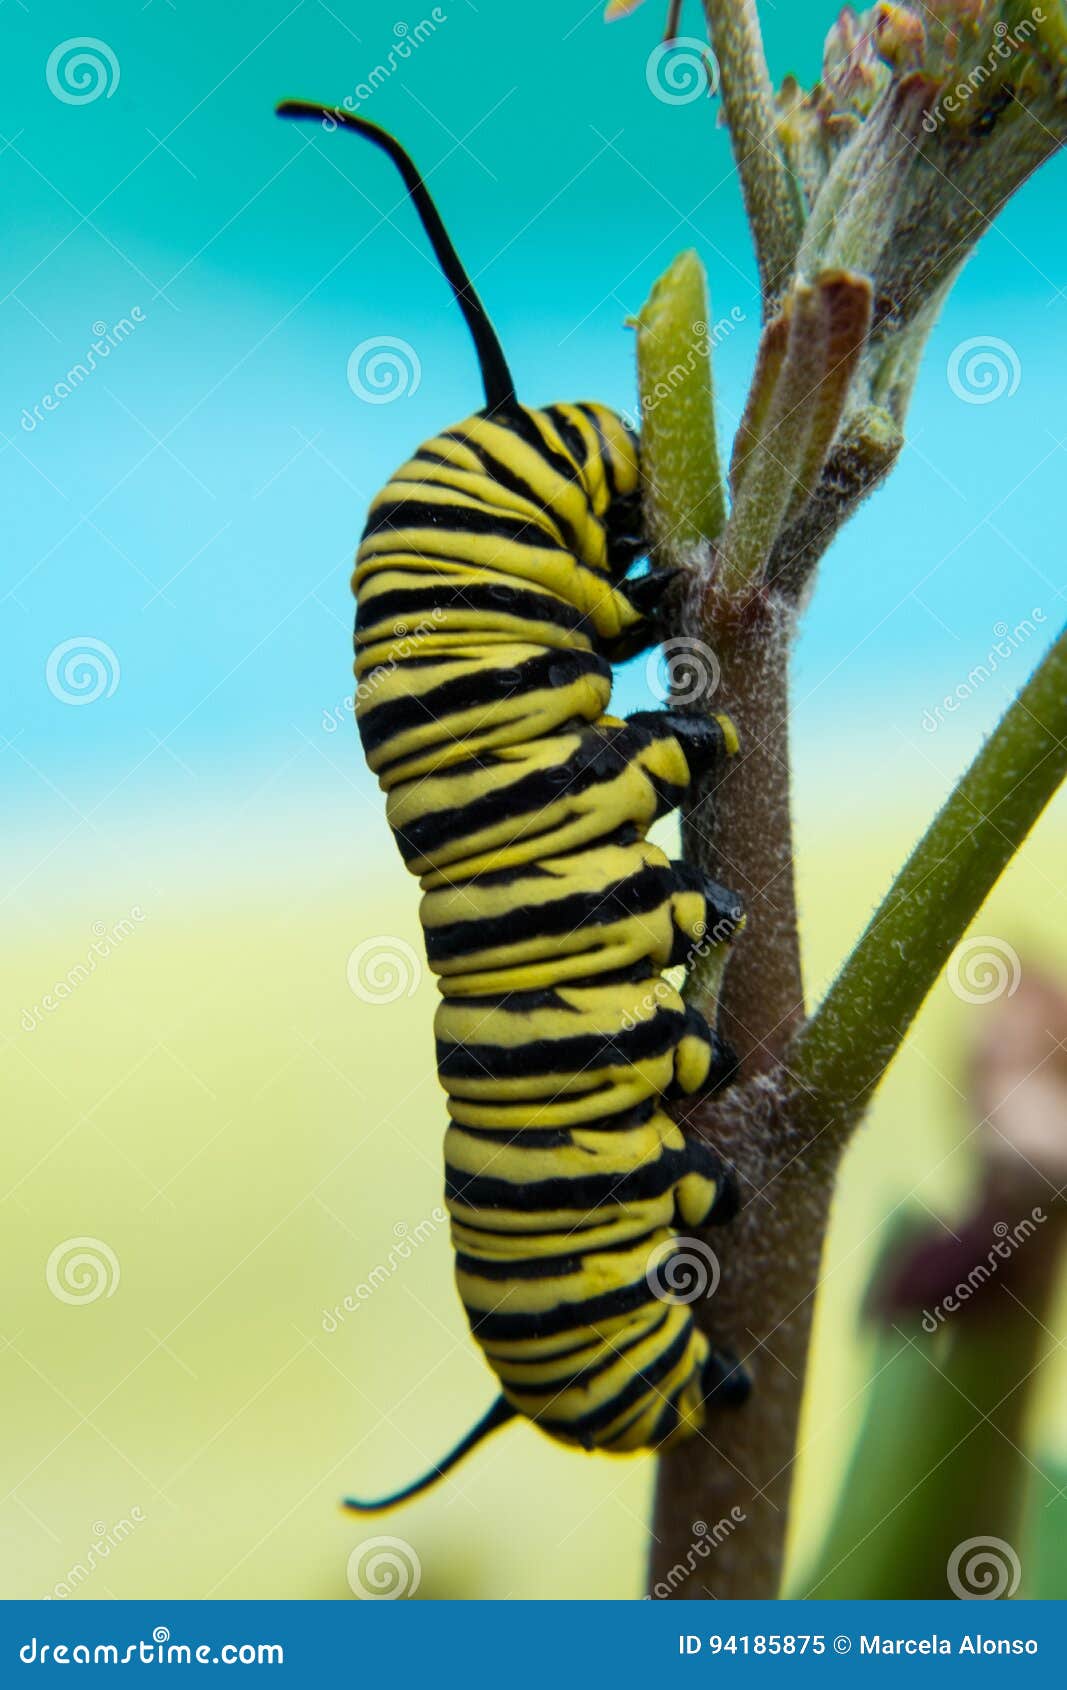 yellow and black caterpillar on turquoise background